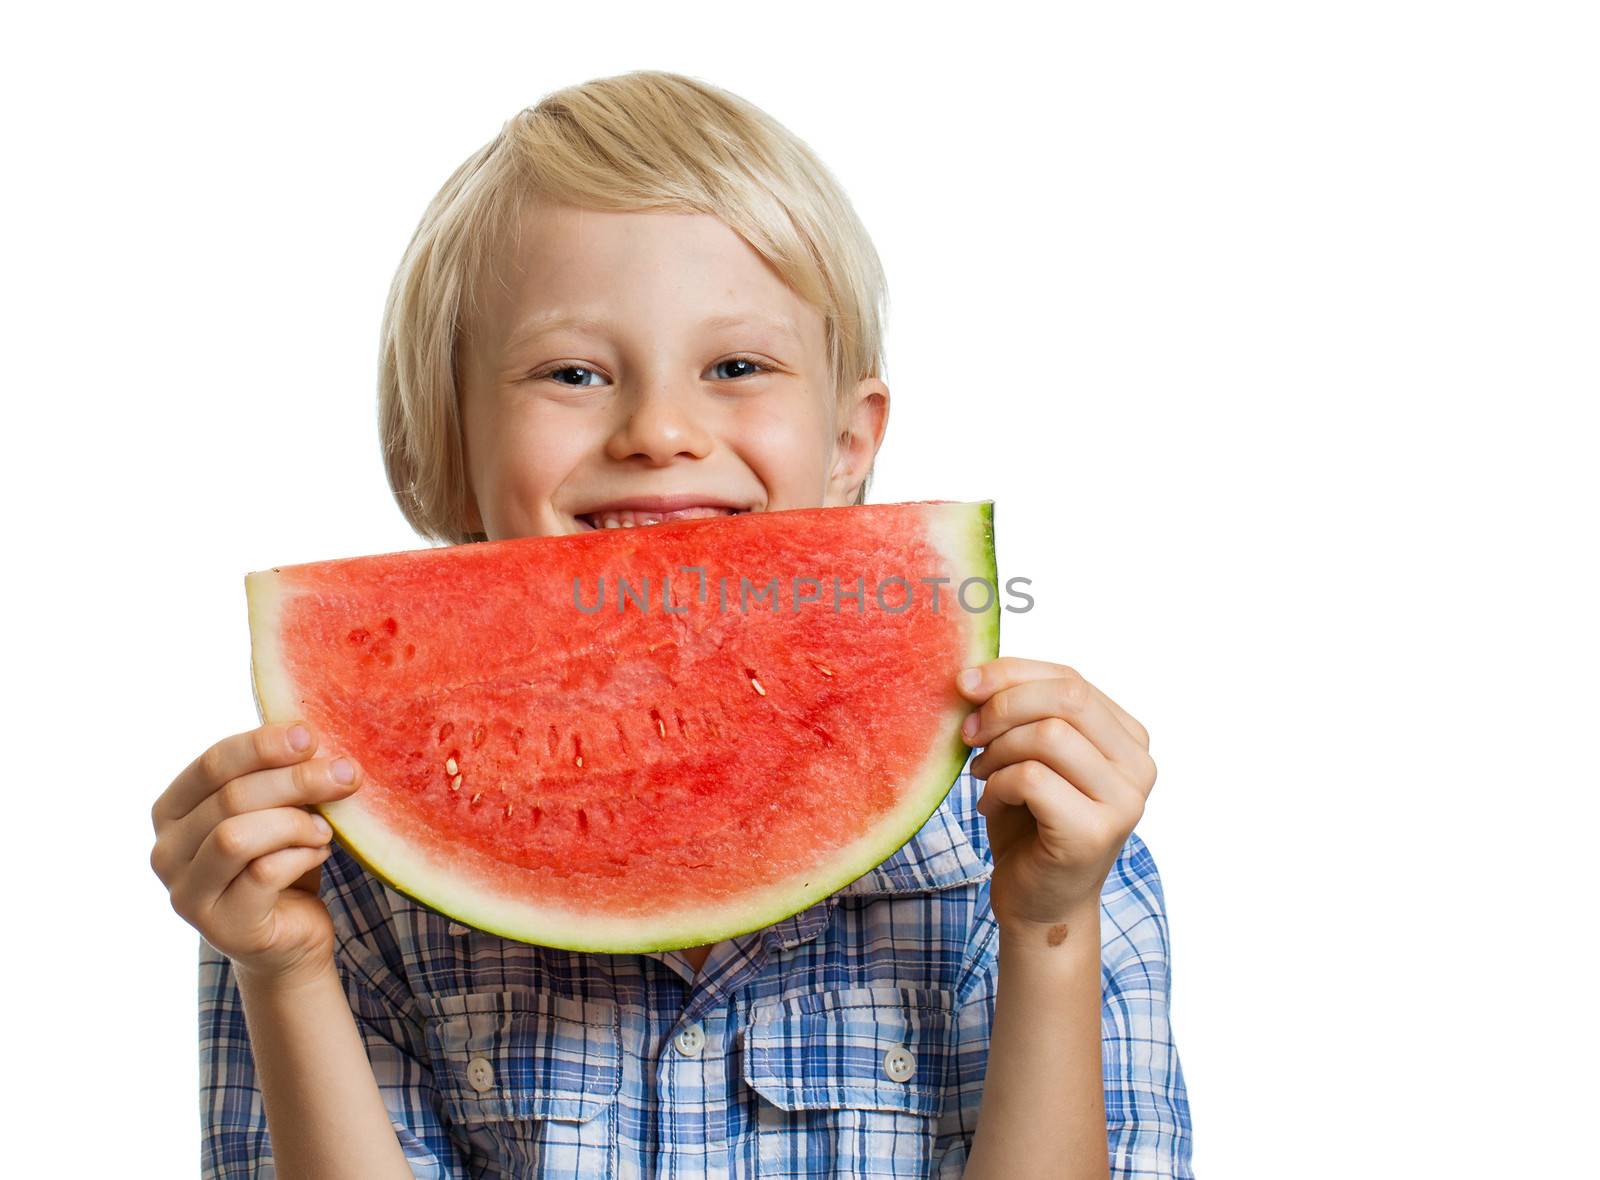 A cute happy boy smiling behind a juicy  slice of watermelon. Isolated on white.